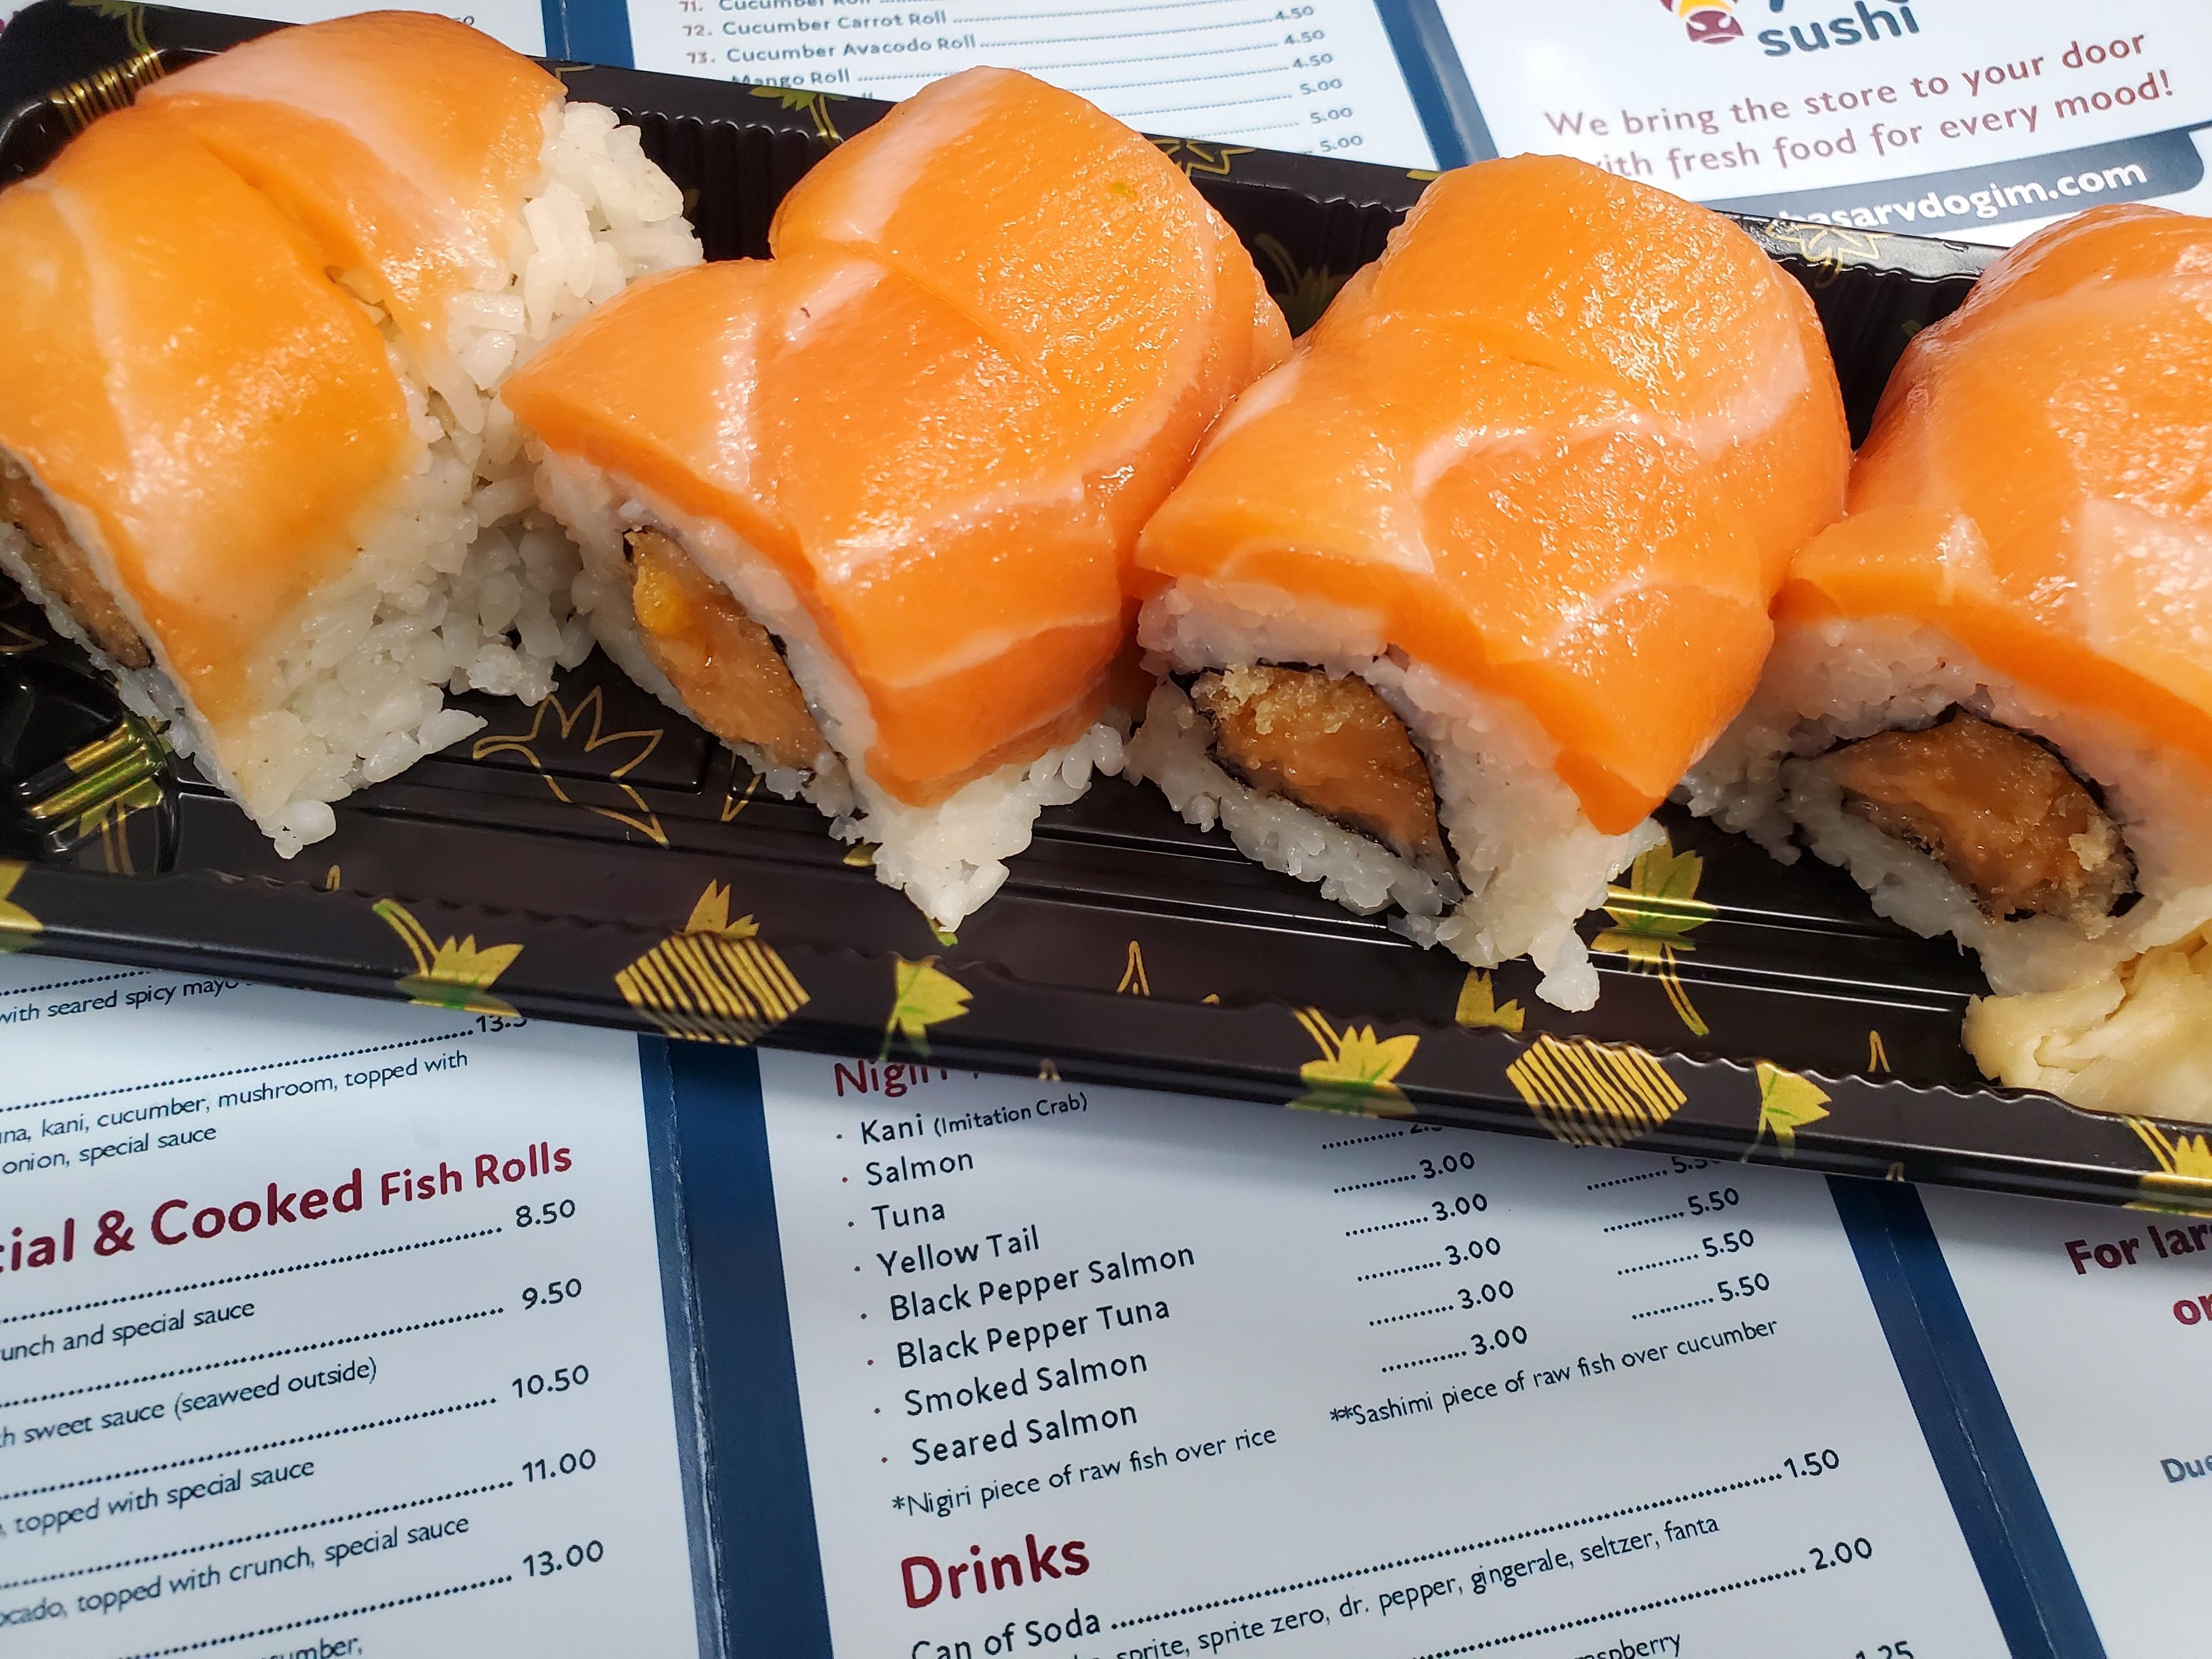 47. salmon lover's roll